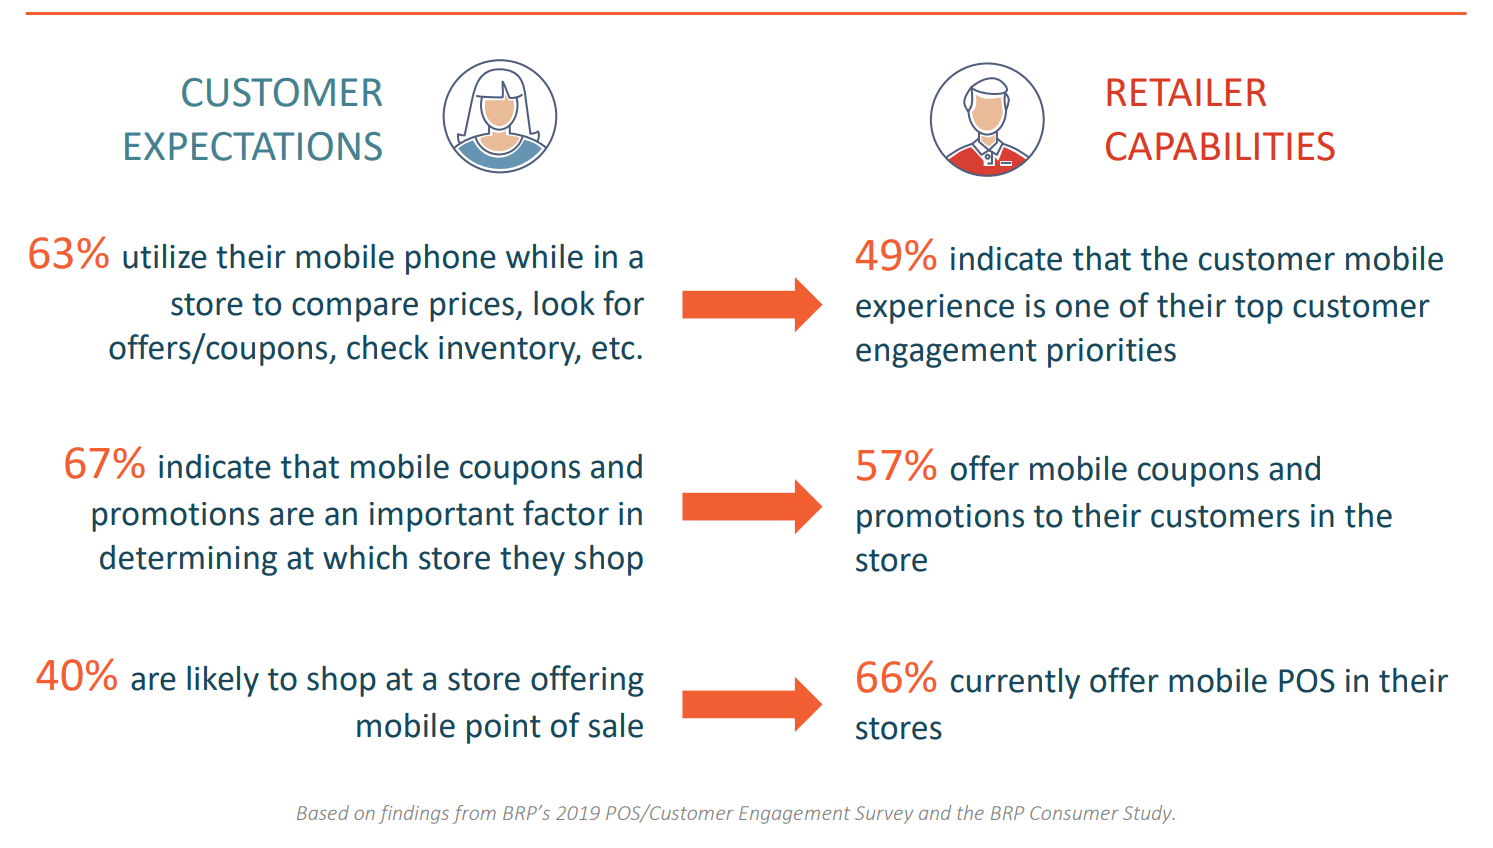 Mobile mandate—63% use phones for product research while in-store